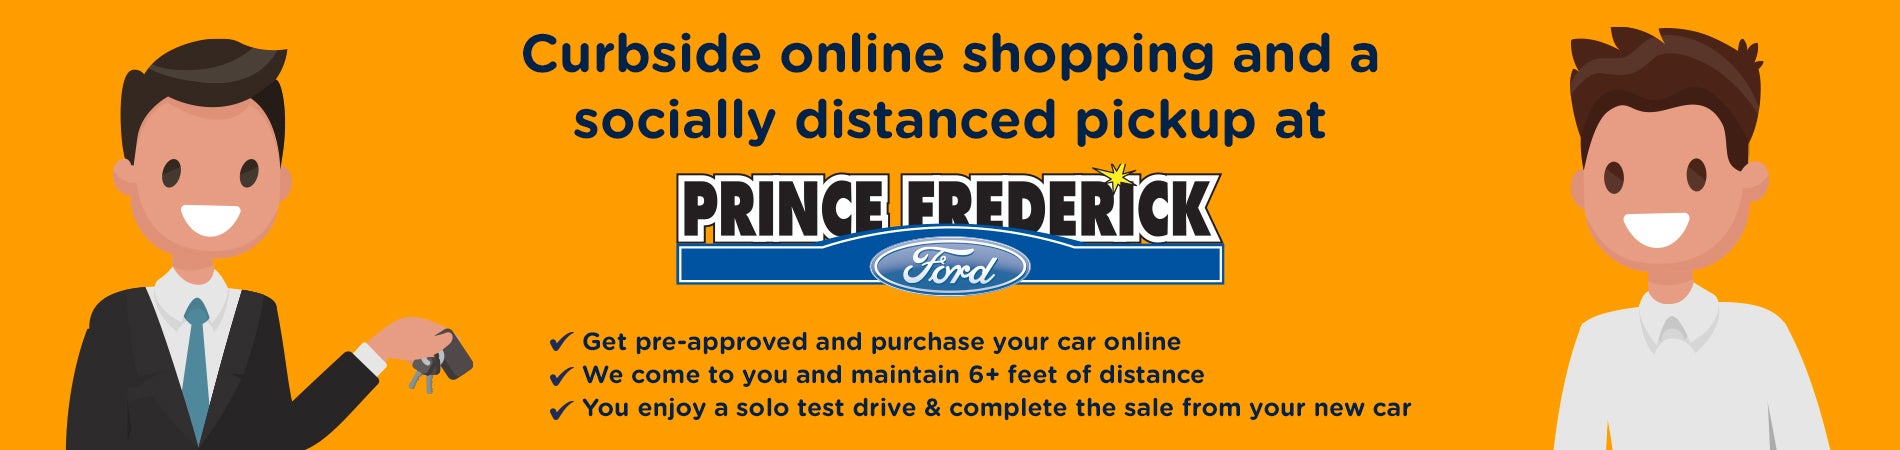 Ford Dealer in Prince Frederick, MD | Used Cars Prince Frederick